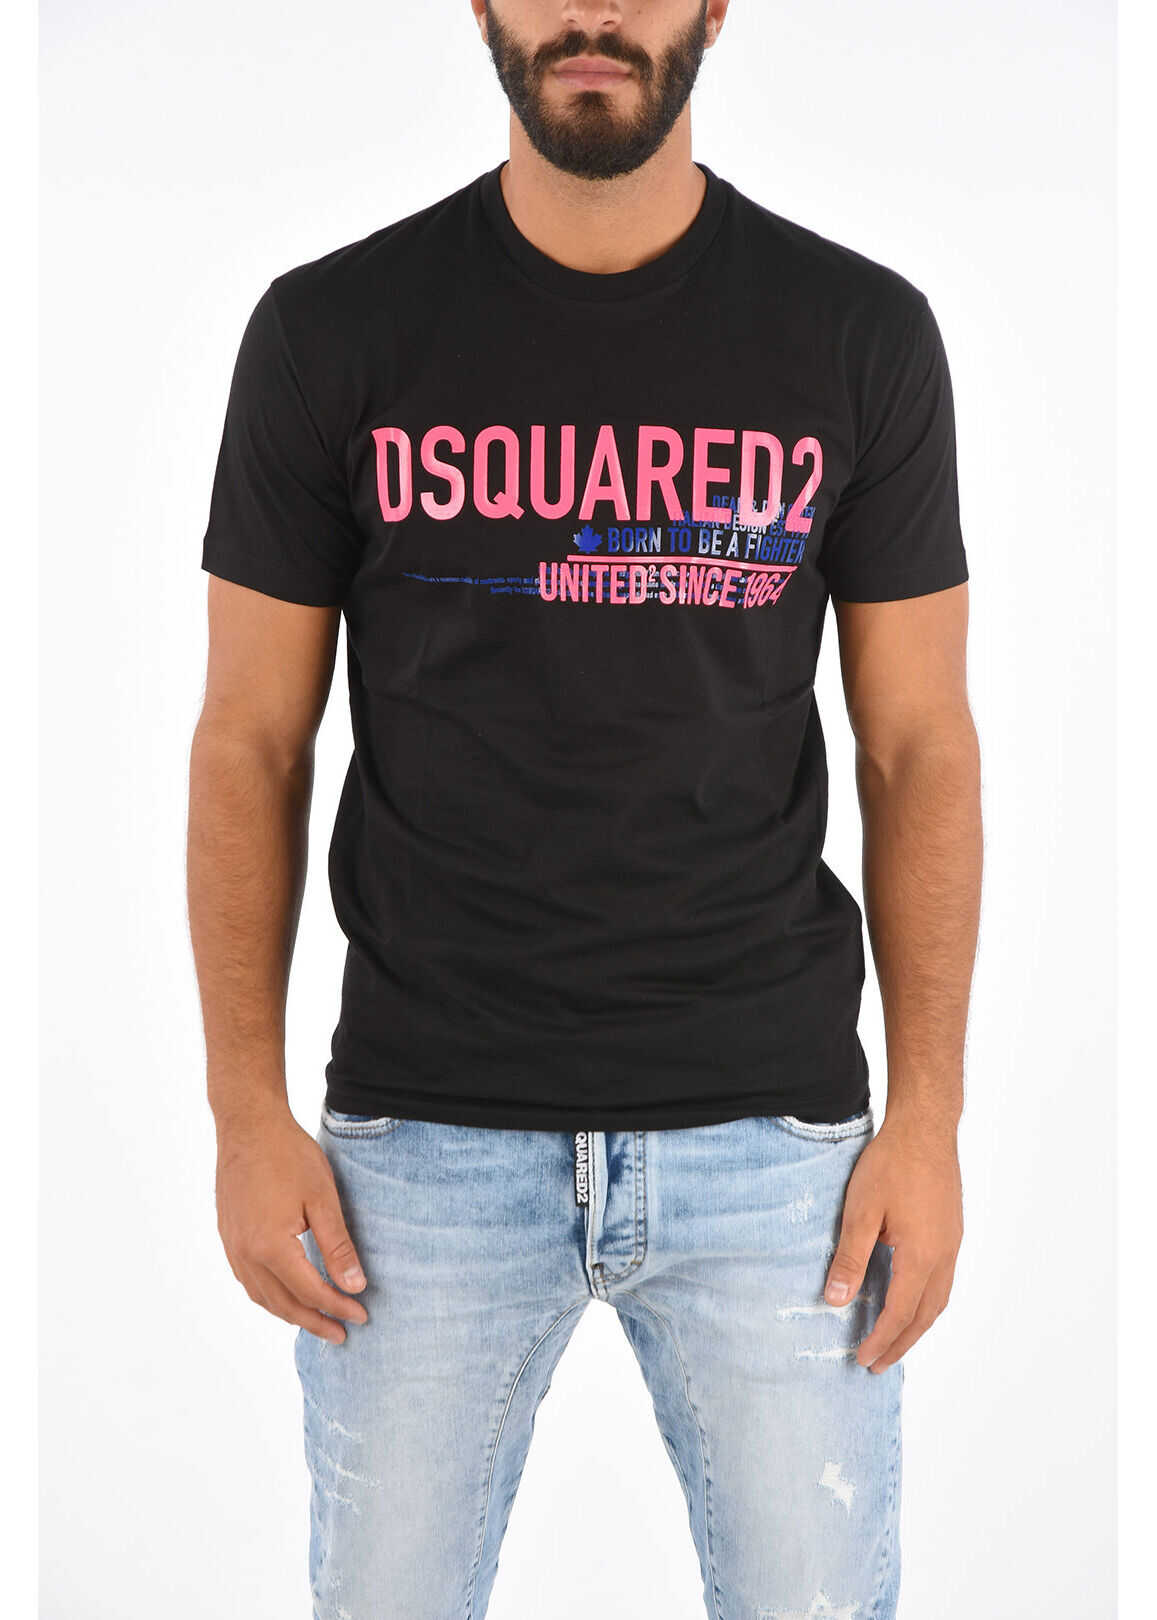 DSQUARED2 Cool Fit T-Shirt Born To Be A Fighter With Fluo Print Black